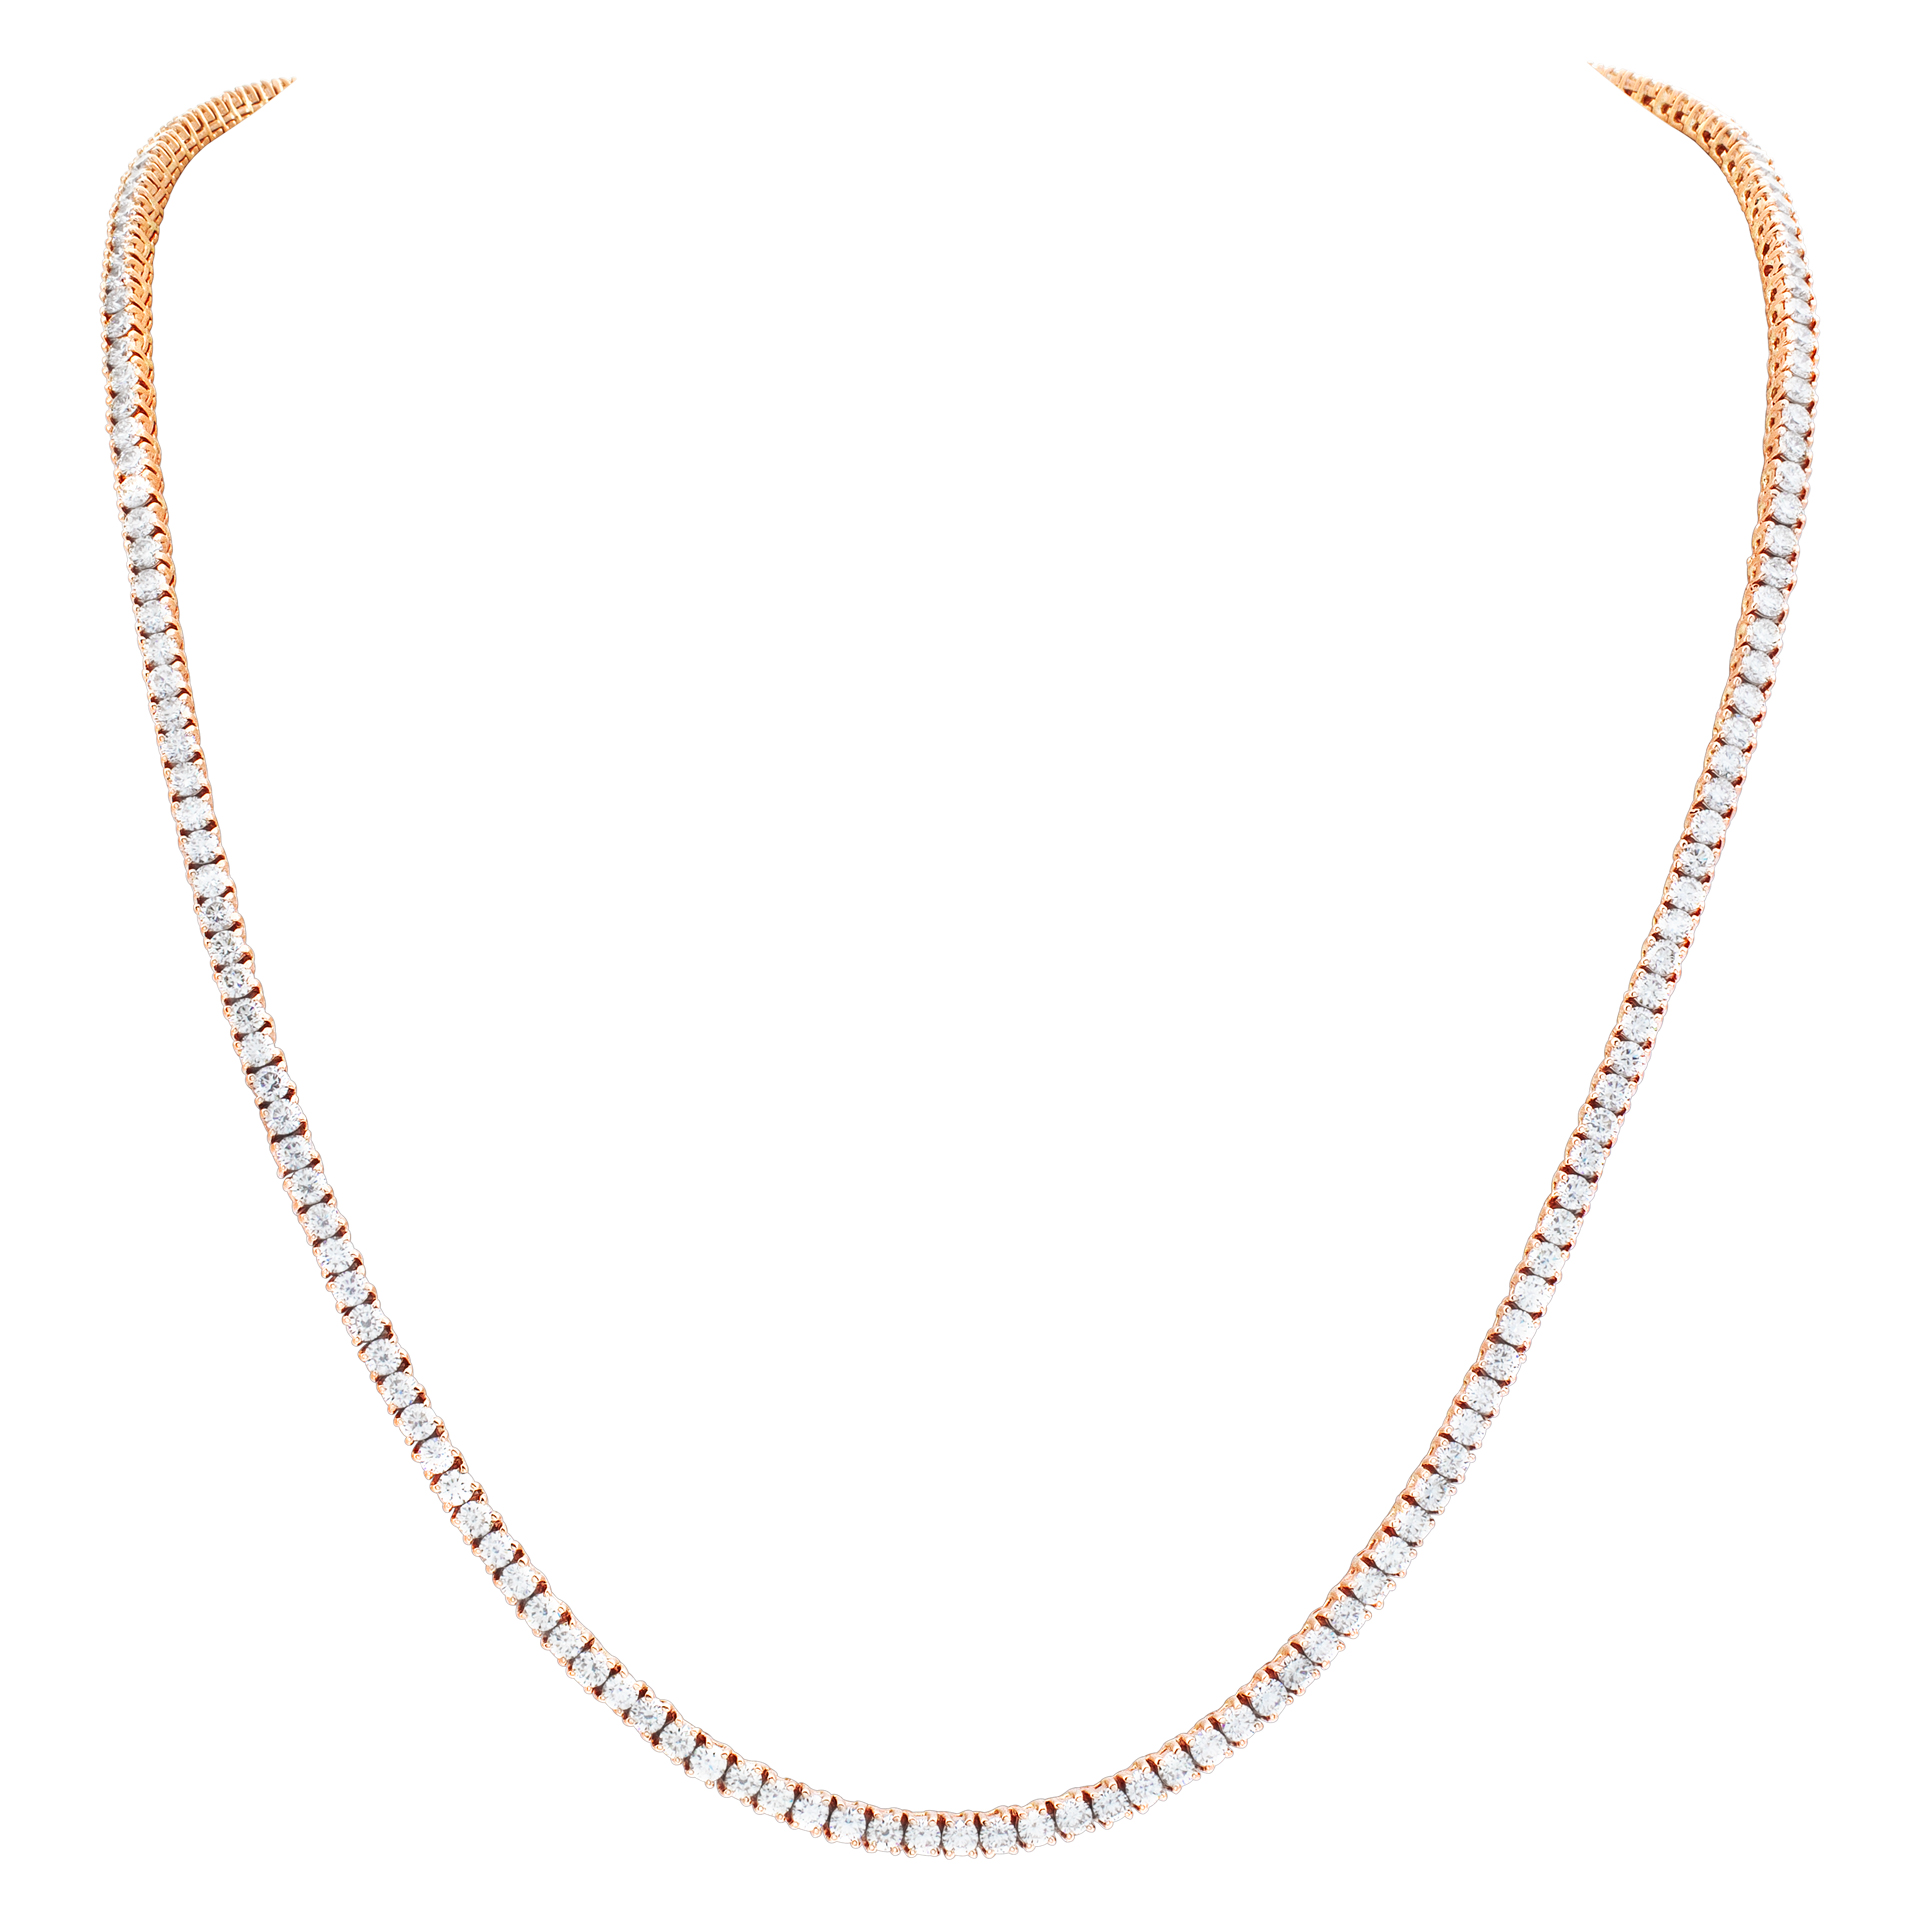 Line  necklace with 17.85 carats full cut round brilliant diamonds set in 14K rose gold. image 1